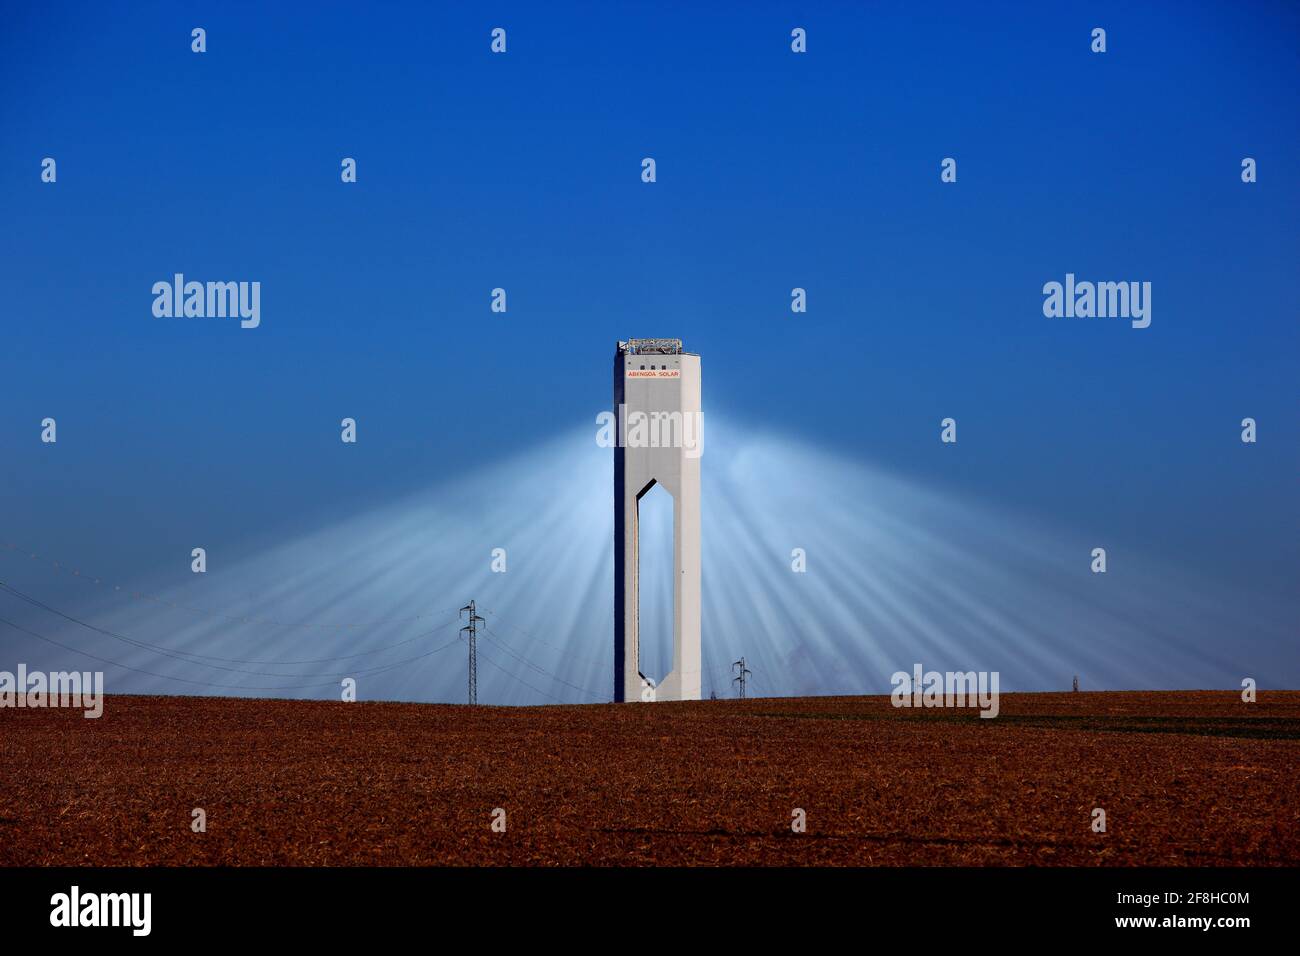 PS10 Solar Power Plant, Planta Solar 10, is the world's first commercial concentrating solar power tower operating in Sanlucar la Mayor near Seville, Stock Photo